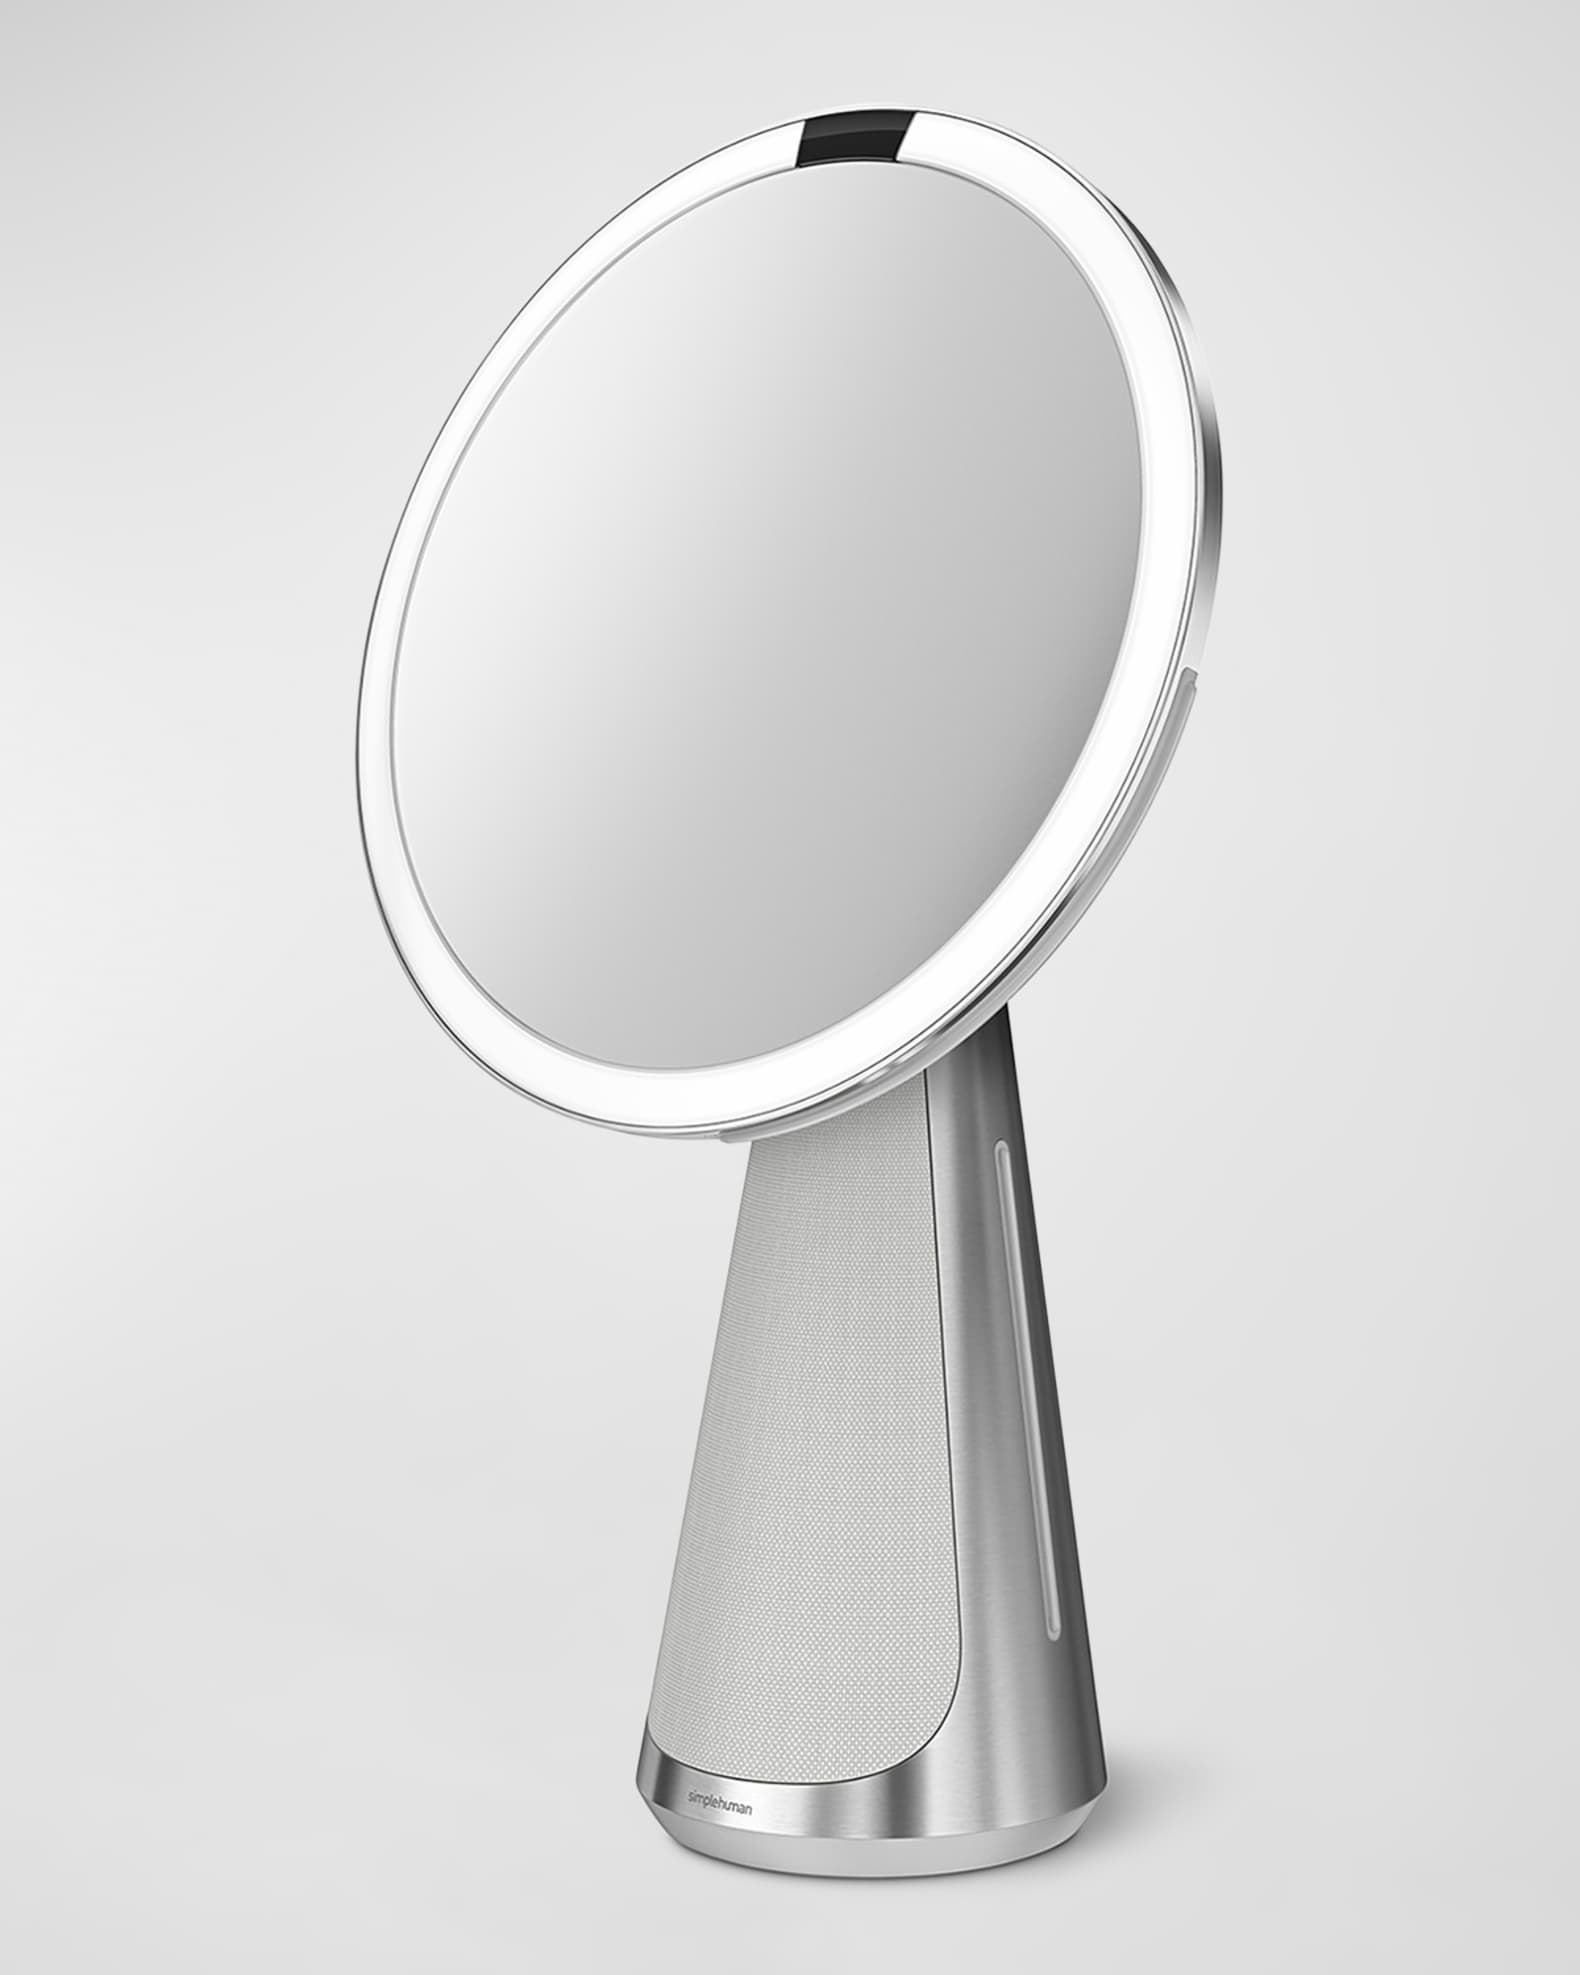 Sensor Mirror by SimpleHuman Review - A Great Accessory!